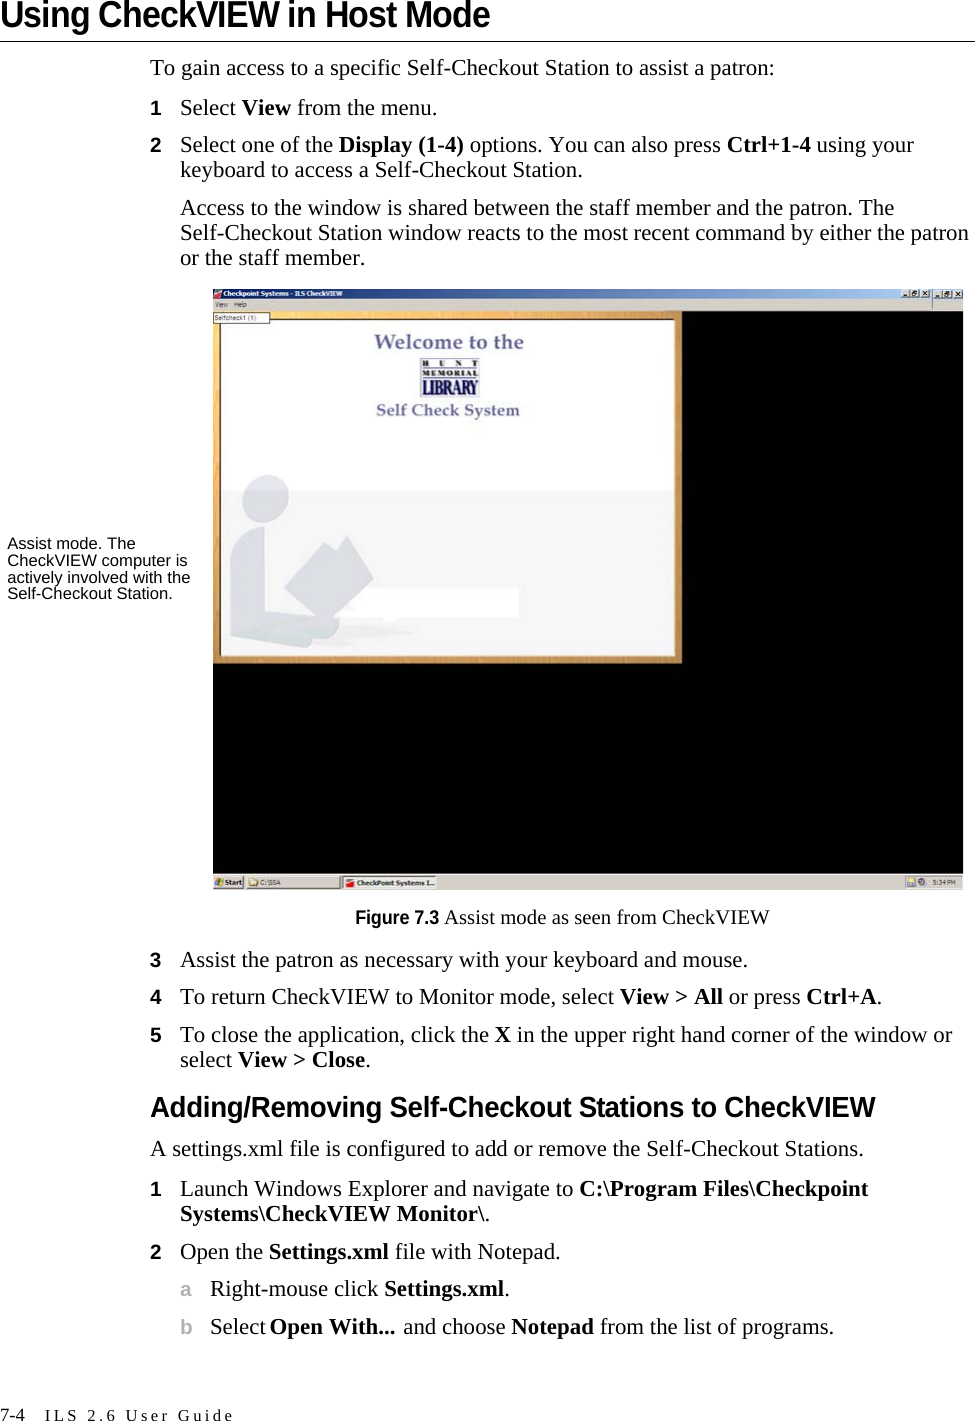 7-4 ILS 2.6 User GuideUsing CheckVIEW in Host ModeTo gain access to a specific Self-Checkout Station to assist a patron:1Select View from the menu.2Select one of the Display (1-4) options. You can also press Ctrl+1-4 using your keyboard to access a Self-Checkout Station. Access to the window is shared between the staff member and the patron. The Self-Checkout Station window reacts to the most recent command by either the patron or the staff member. Figure 7.3 Assist mode as seen from CheckVIEW3Assist the patron as necessary with your keyboard and mouse.4To return CheckVIEW to Monitor mode, select View &gt; All or press Ctrl+A. 5To close the application, click the X in the upper right hand corner of the window or select View &gt; Close.Adding/Removing Self-Checkout Stations to CheckVIEWA settings.xml file is configured to add or remove the Self-Checkout Stations. 1Launch Windows Explorer and navigate to C:\Program Files\Checkpoint Systems\CheckVIEW Monitor\.2Open the Settings.xml file with Notepad.aRight-mouse click Settings.xml.bSelect Open With... and choose Notepad from the list of programs.Assist mode. The CheckVIEW computer is actively involved with the Self-Checkout Station.